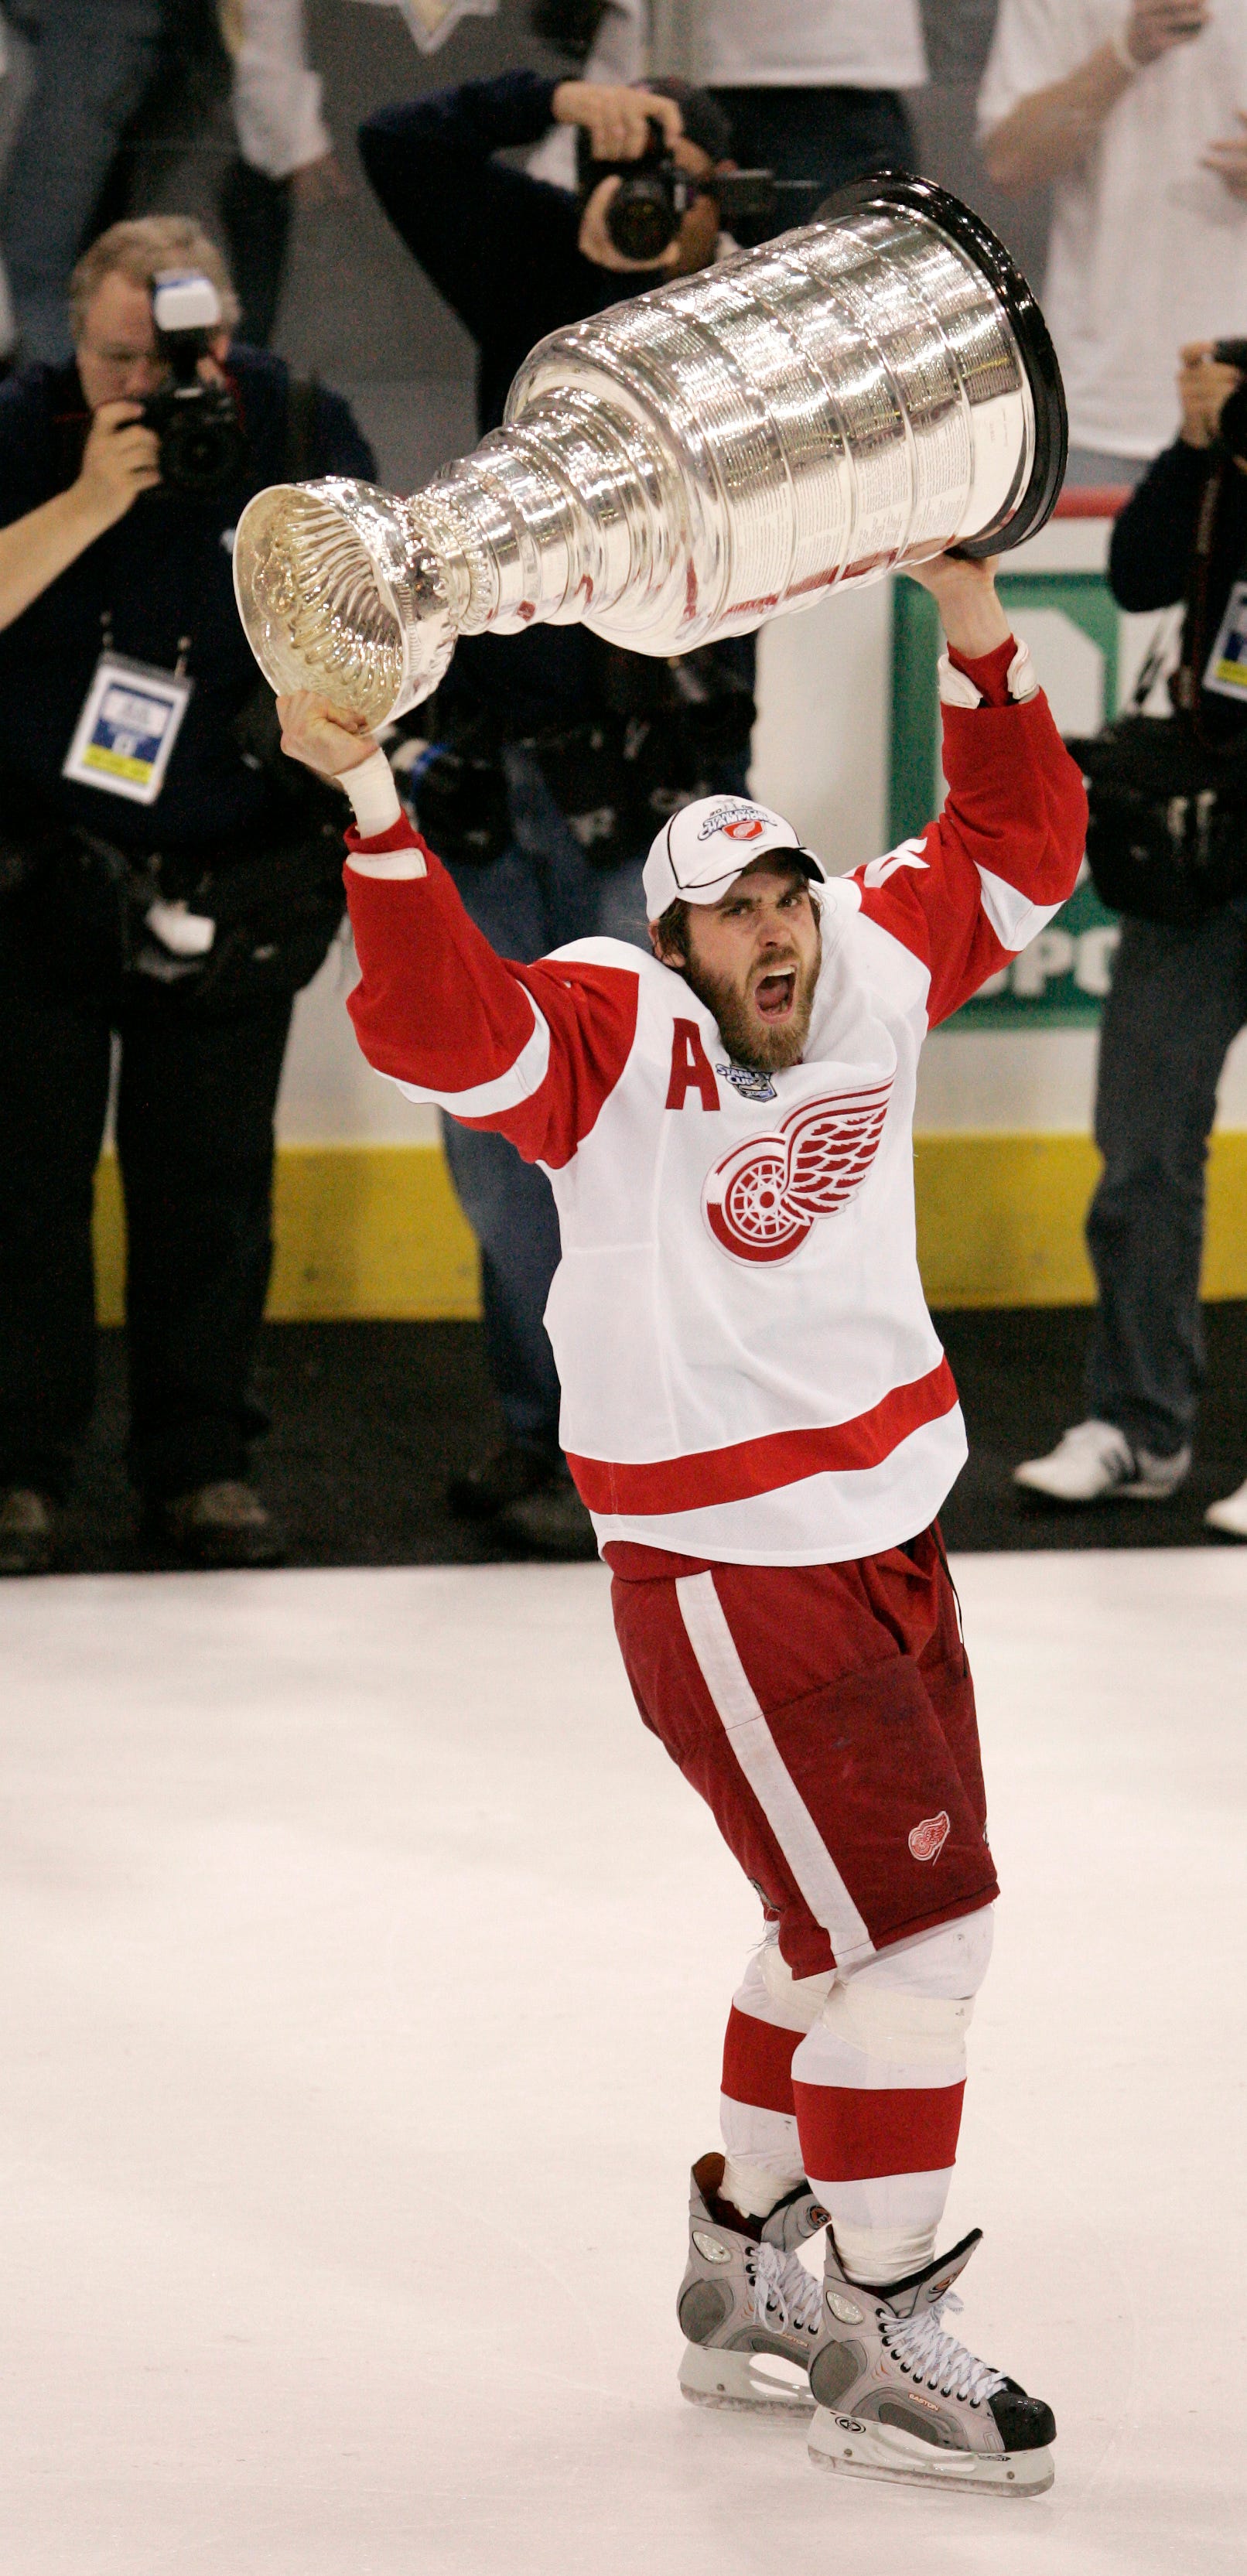 Henrik Zetterberg lifts the Stanley Cup after the Red Wings defeated the Penguins in 2008.